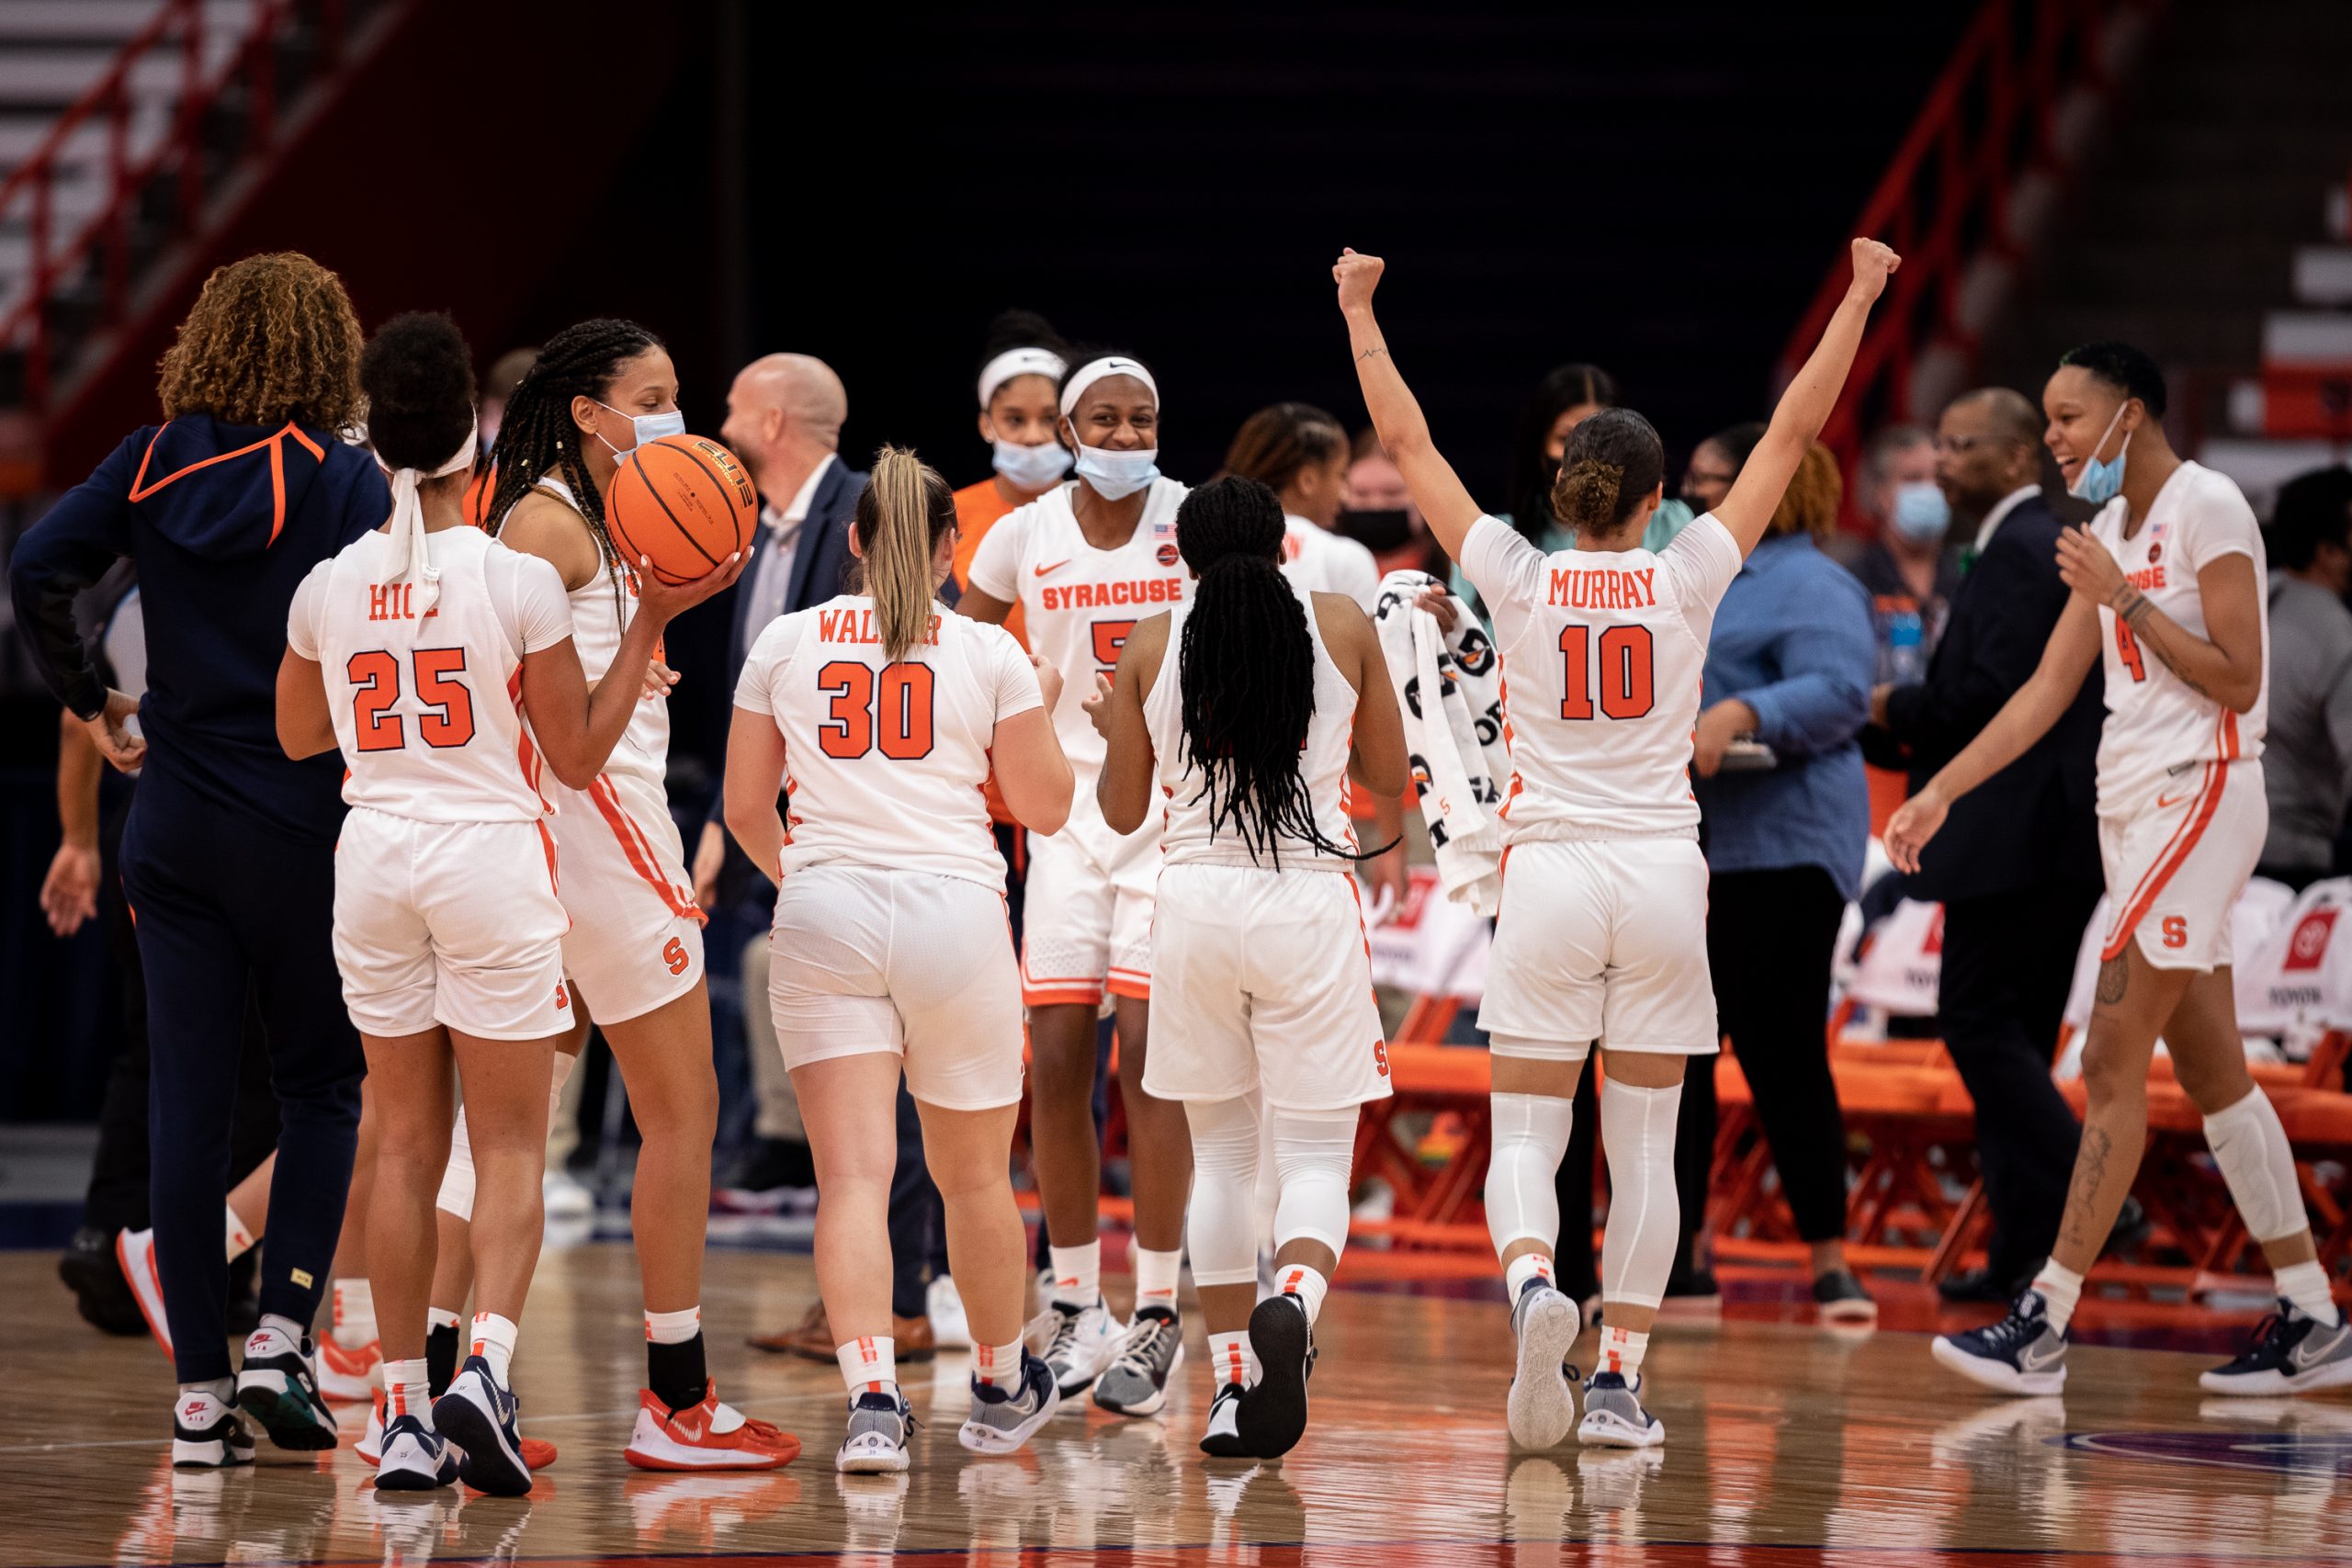 Najé Murray (10) raises her hands around here team after the final buzzer on Saturday in SU's win versus UMBC.